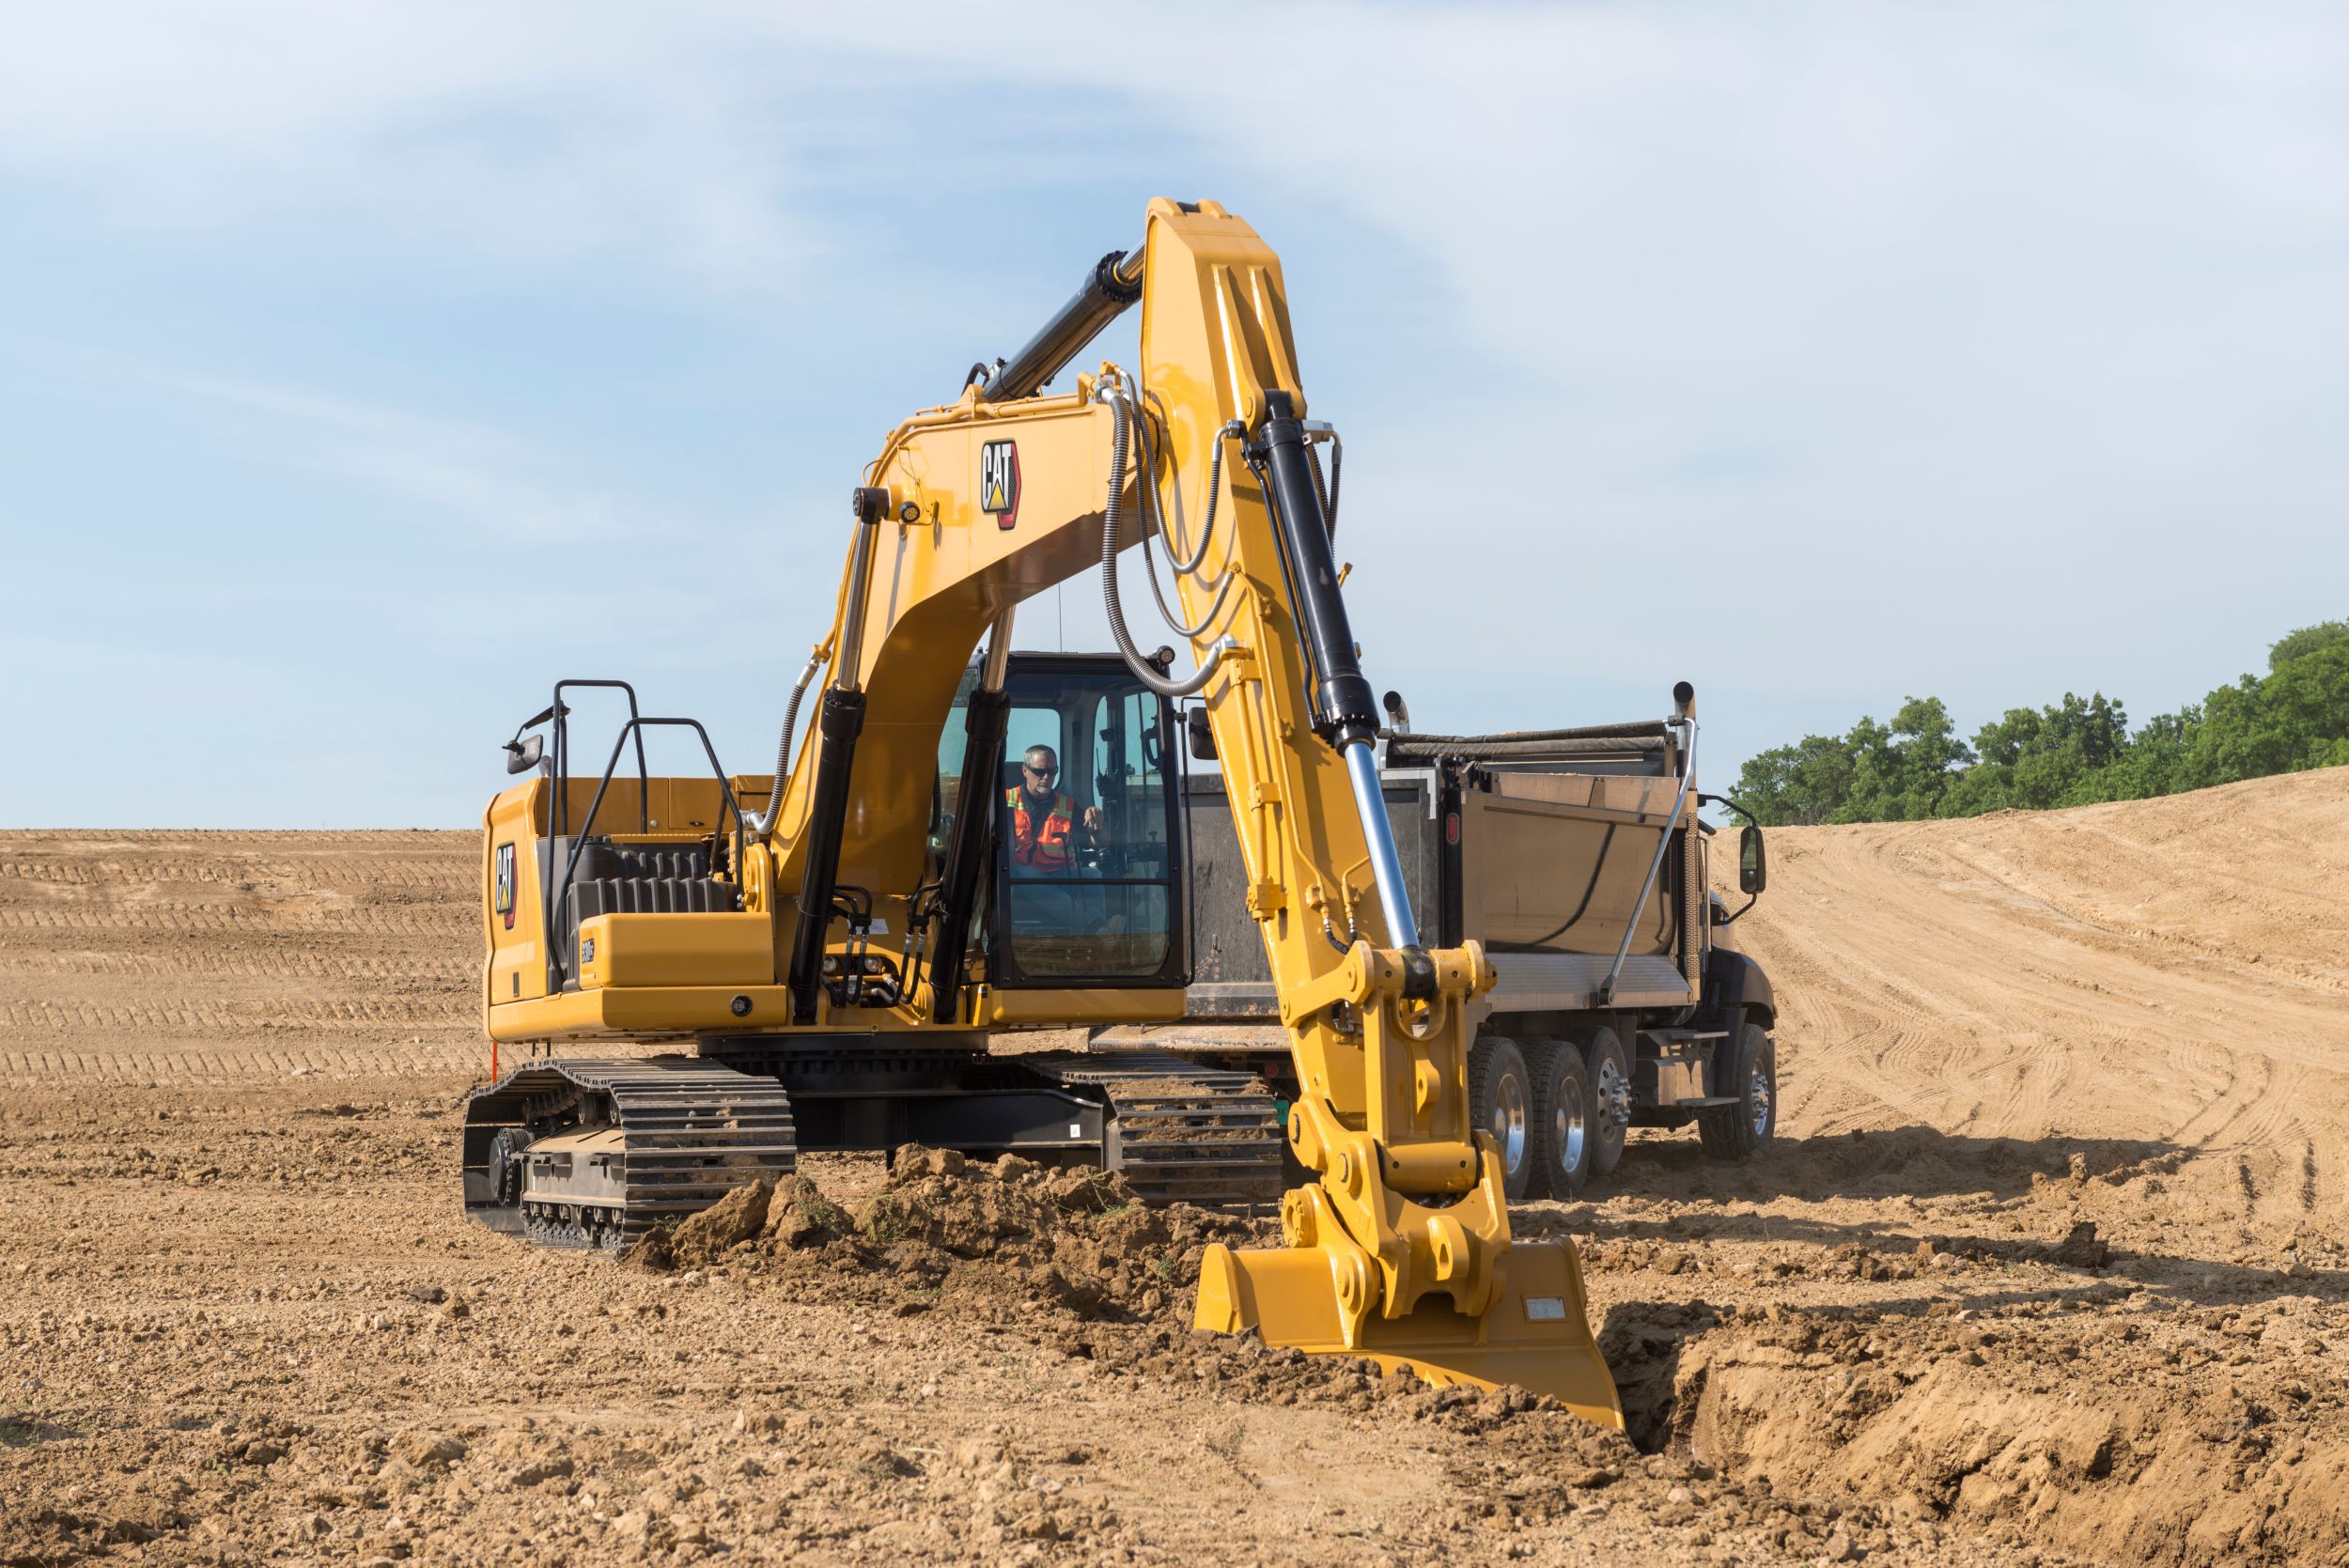 330 GC Hydraulic Excavator digging a utility trench